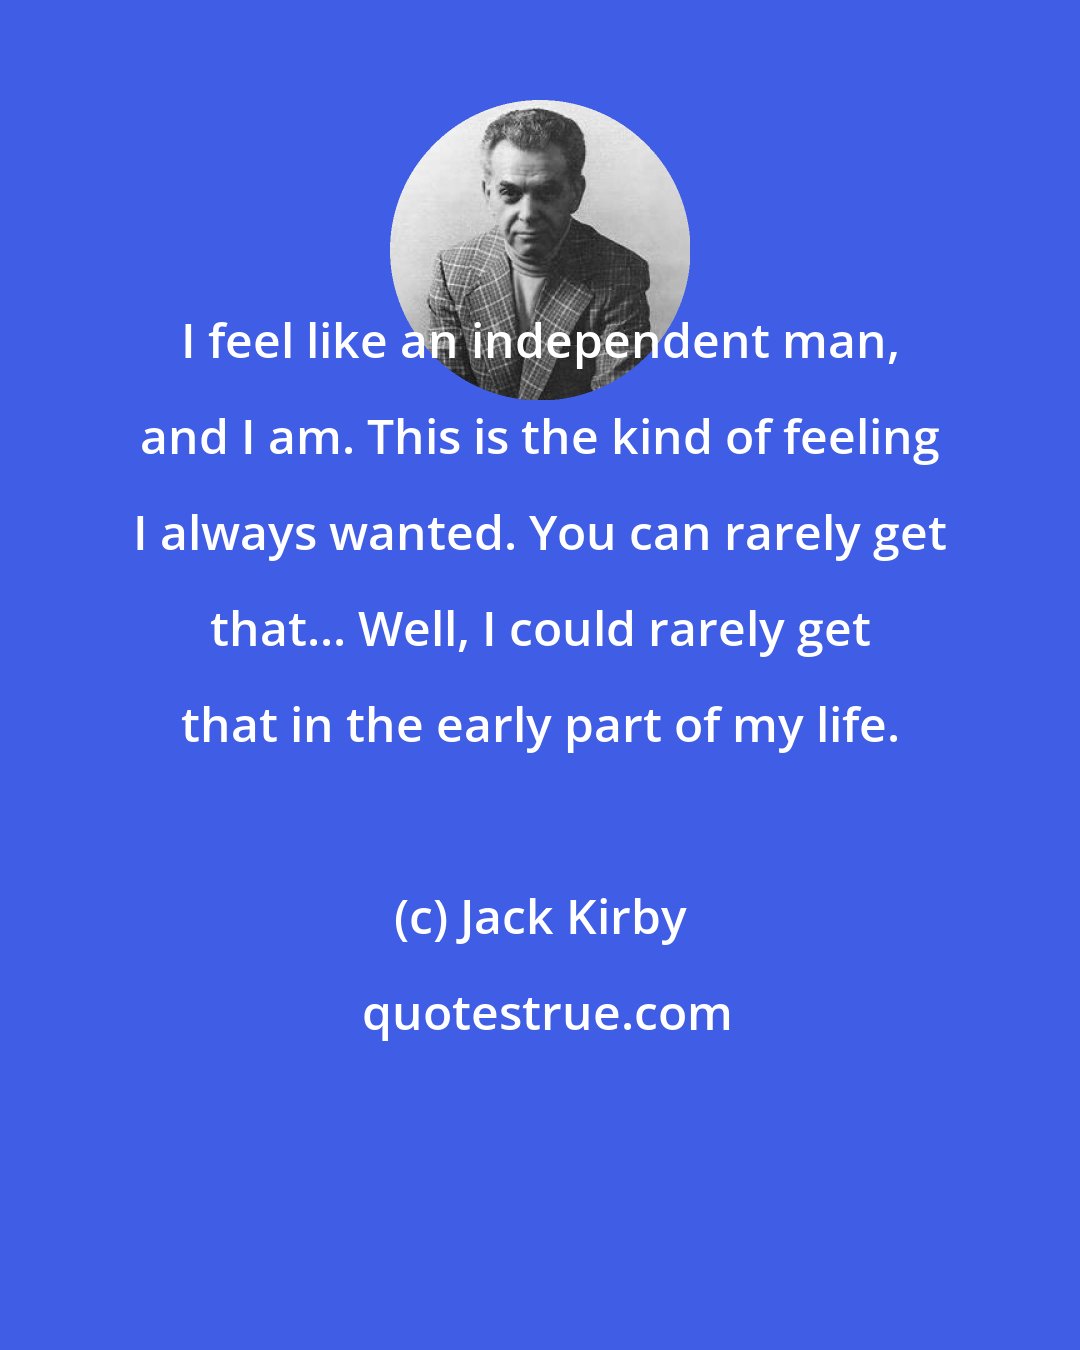 Jack Kirby: I feel like an independent man, and I am. This is the kind of feeling I always wanted. You can rarely get that... Well, I could rarely get that in the early part of my life.